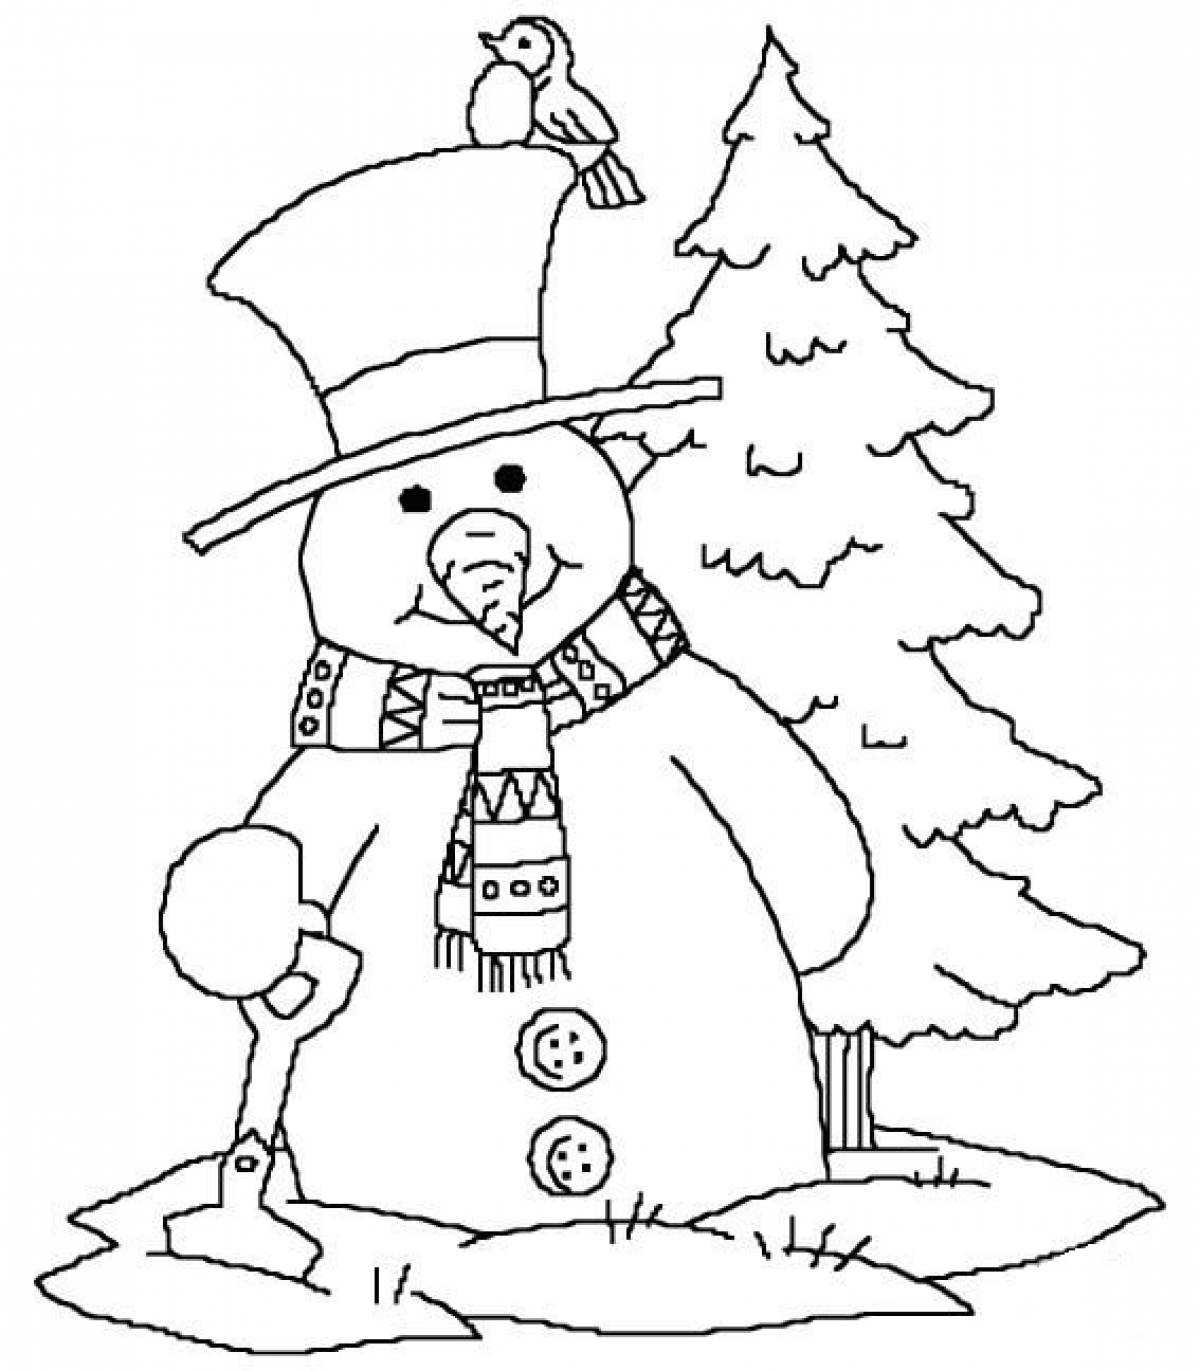 Snowman in the forest